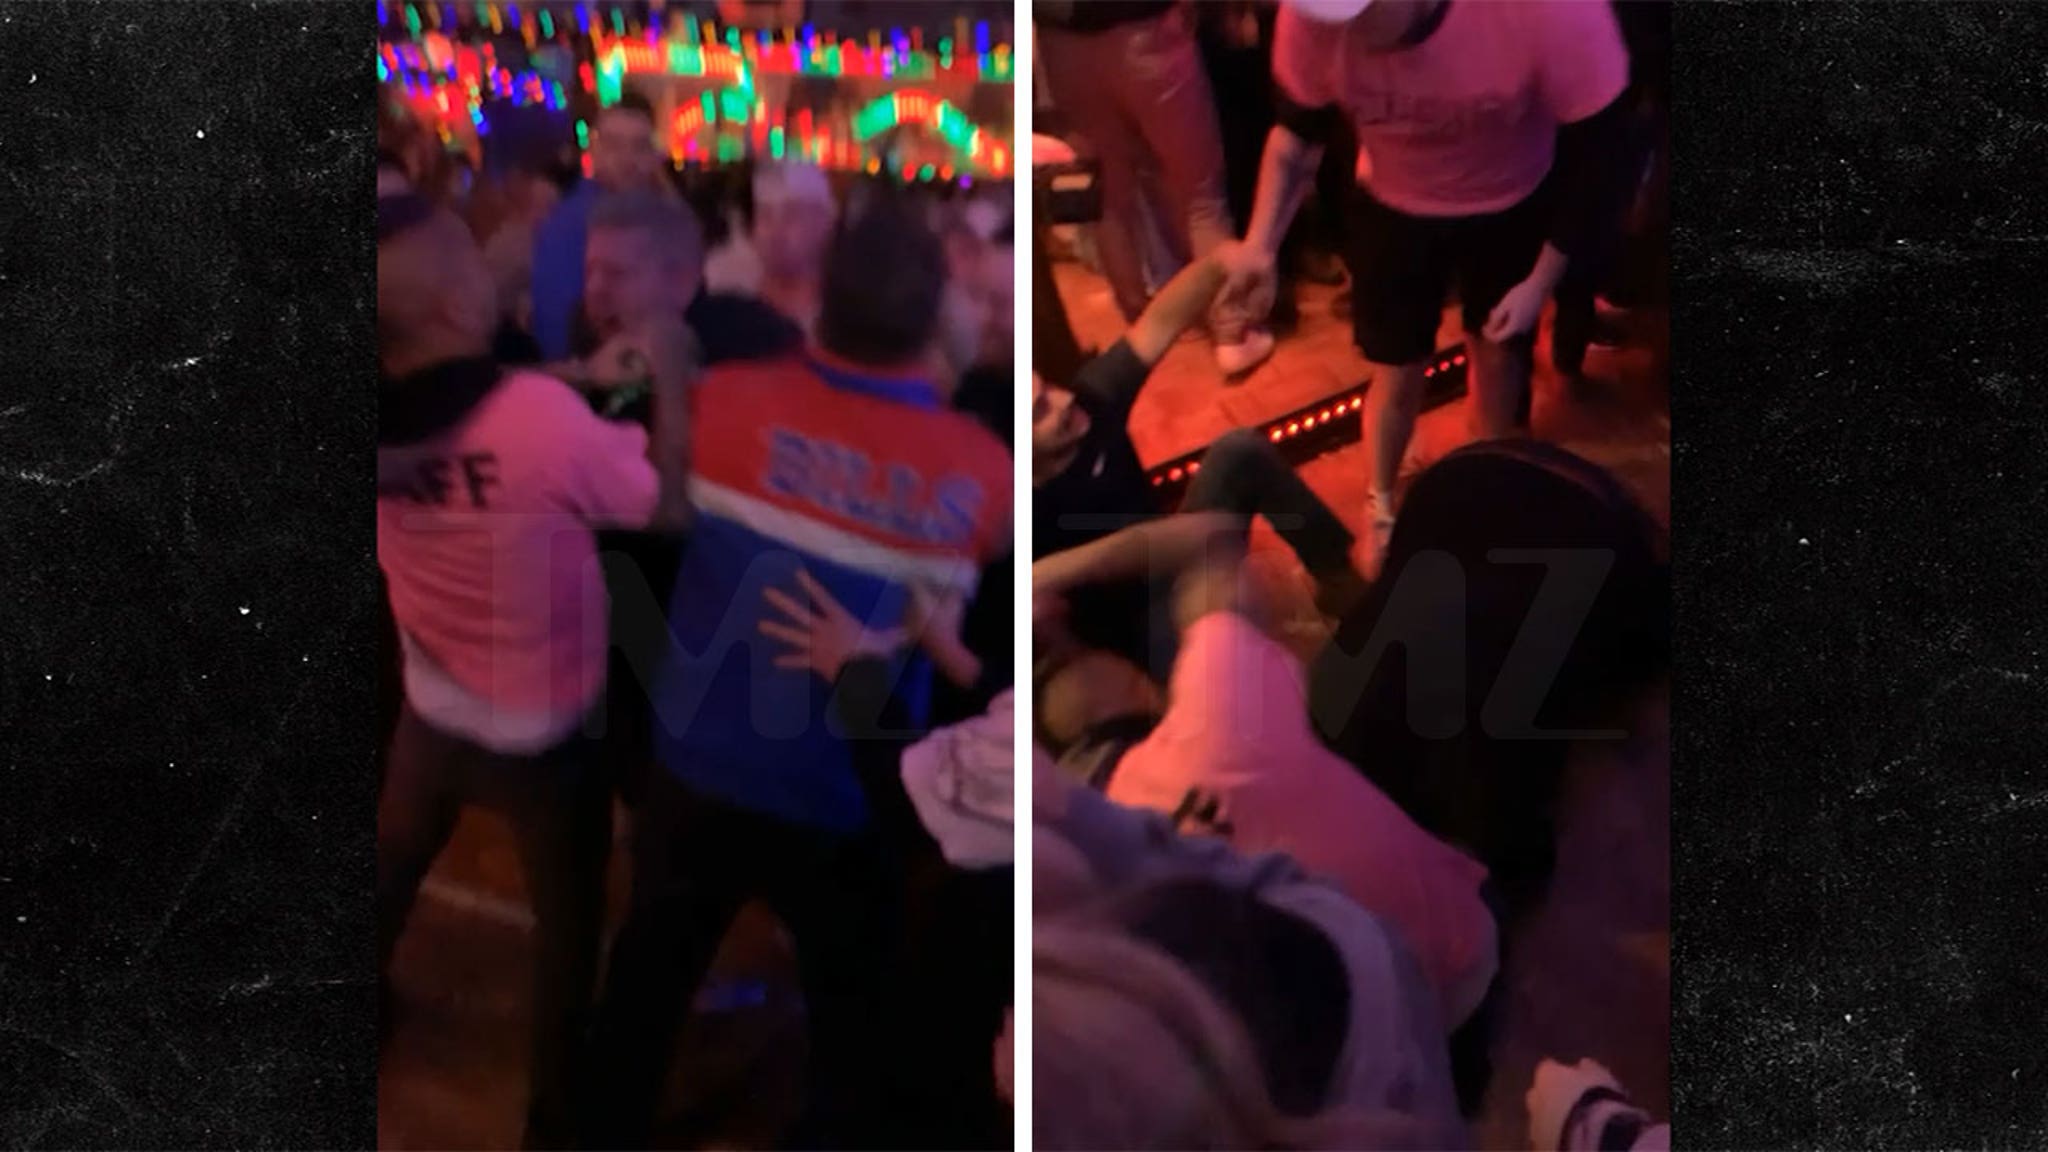 NY Bar Security Staff Roped Into Brawl After Trying to Break Up Fight